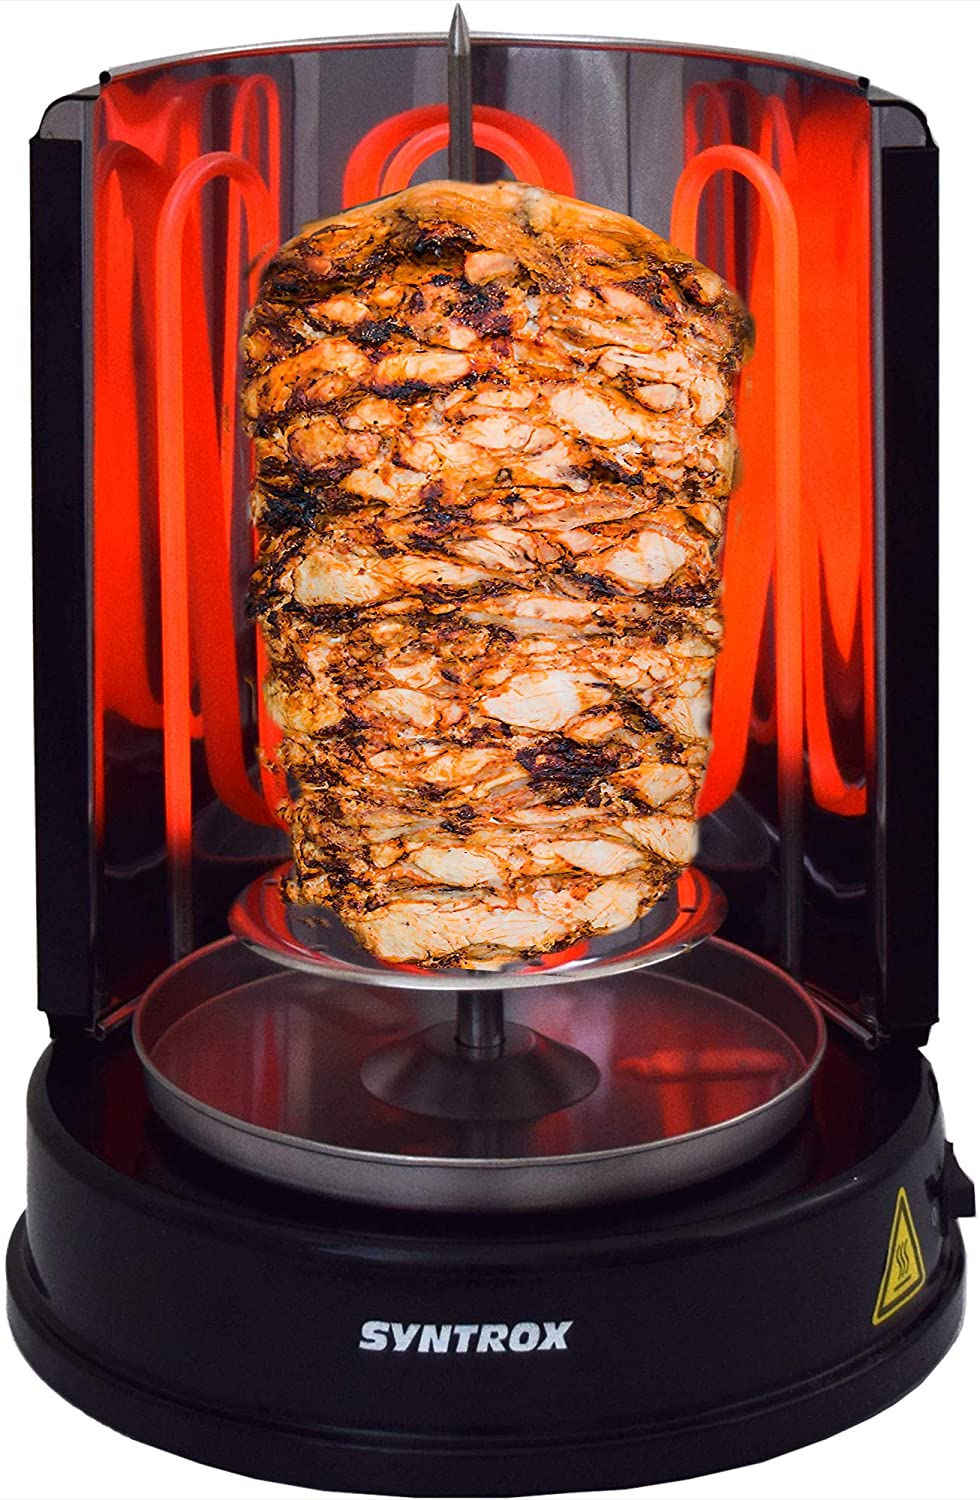 Syntrox Germany Doner Grill Rotisserie Chicken Gyros Grill Barbecue Table Grill black